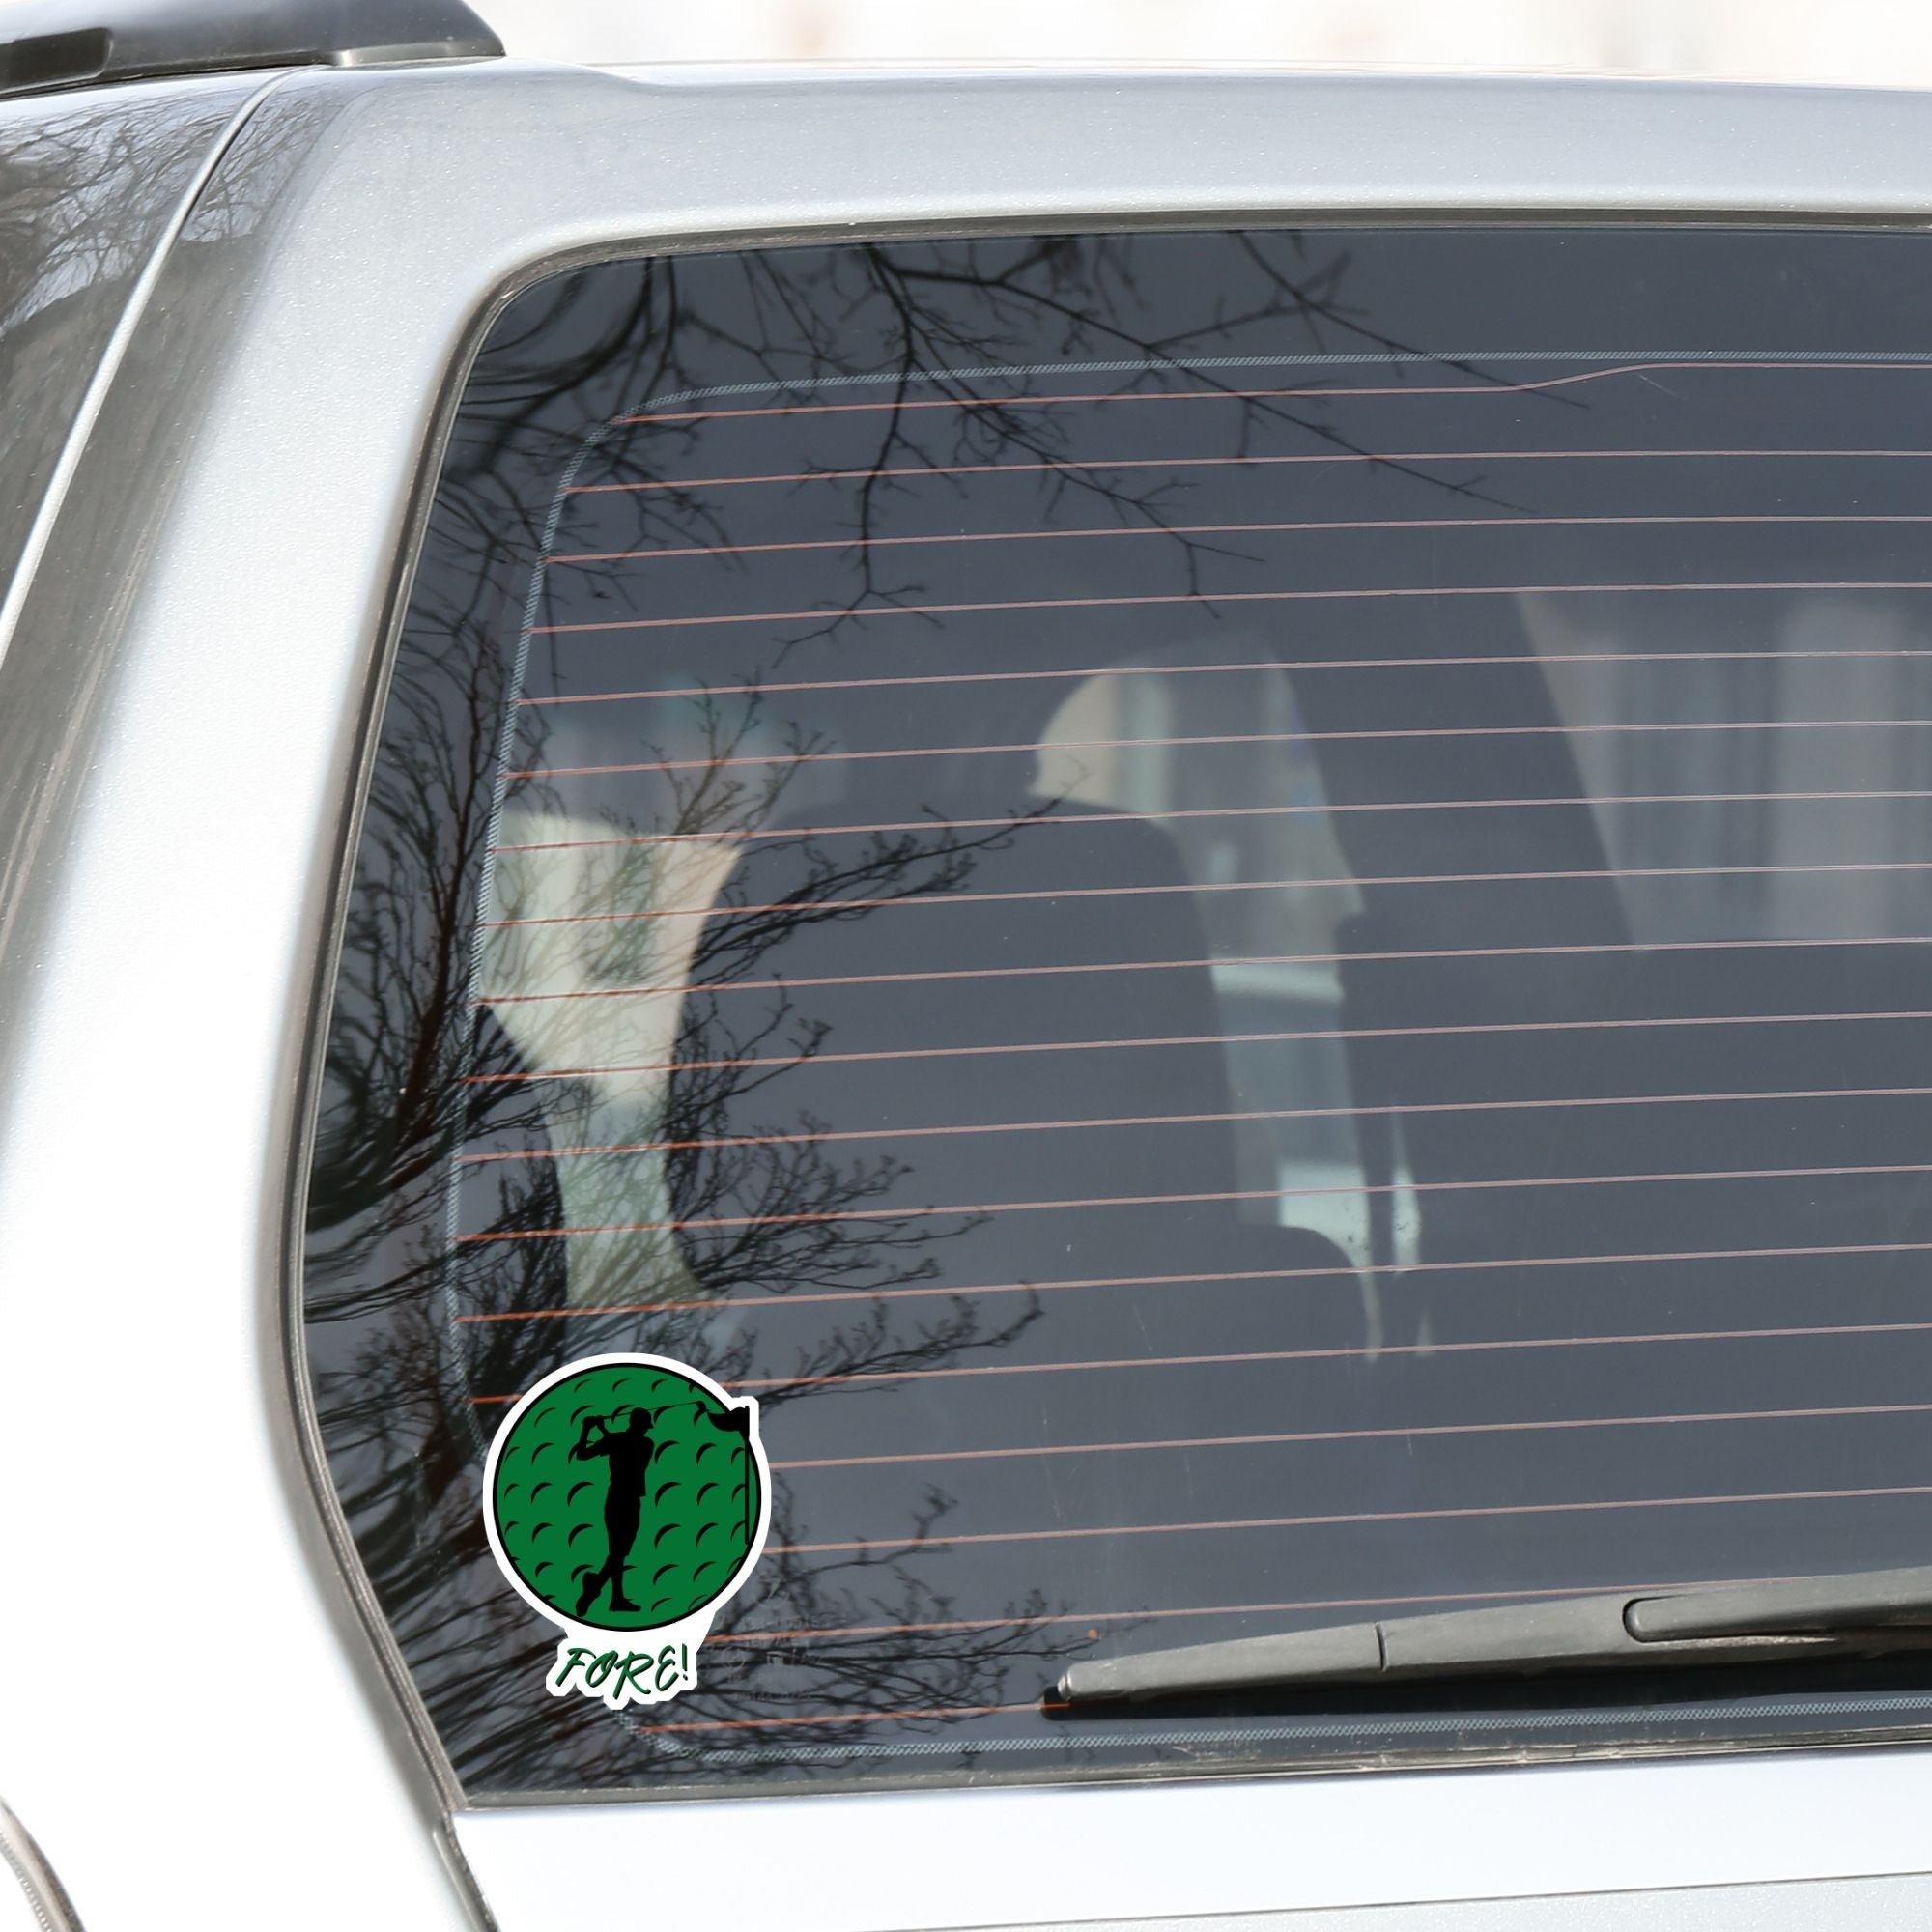 Show your love of golf with this individual die-cut sticker! This sticker shows the silhouette of a golfer about to swing, on a green golf ball background, with the word "Fore!" below.  This image is of the golf sticker on the back window of a car.